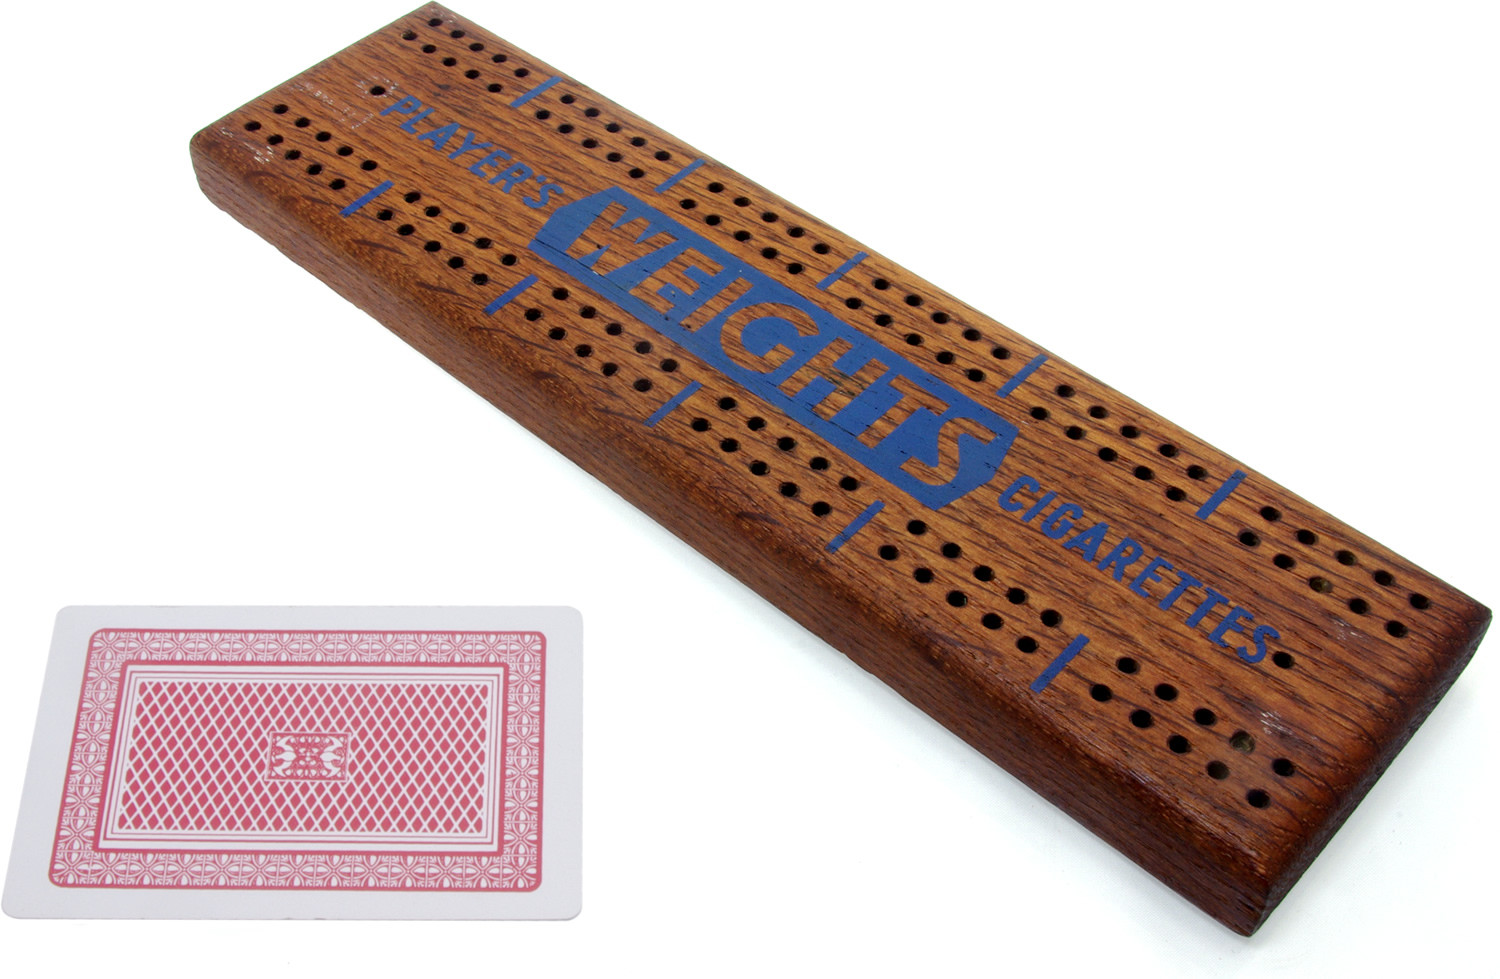 Player's Weights advertising cribbage board